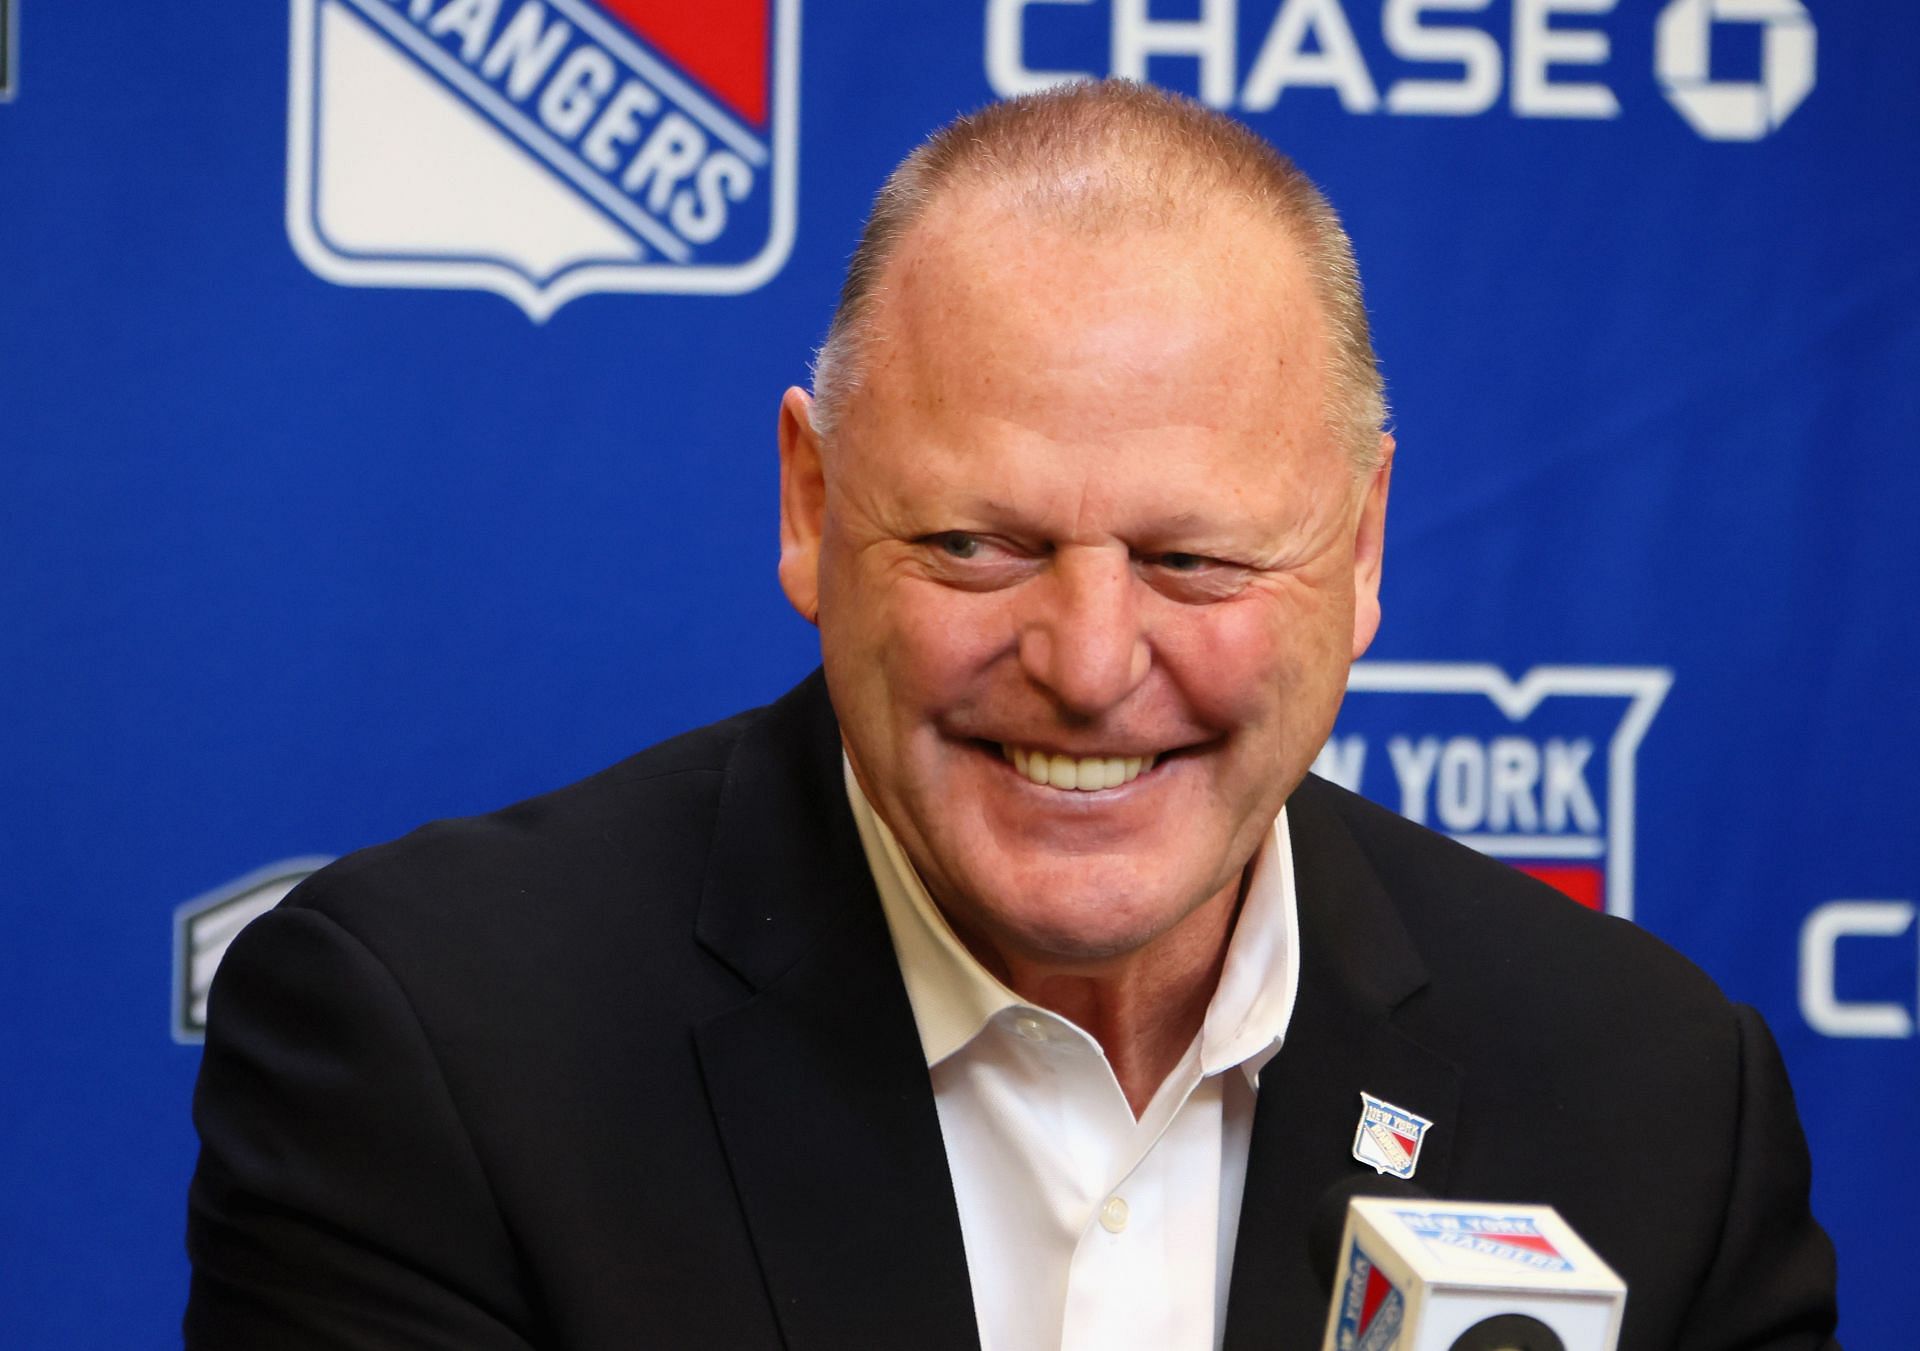 New York Rangers fans react to Gerard Gallant's firing, "He's the fall guy"